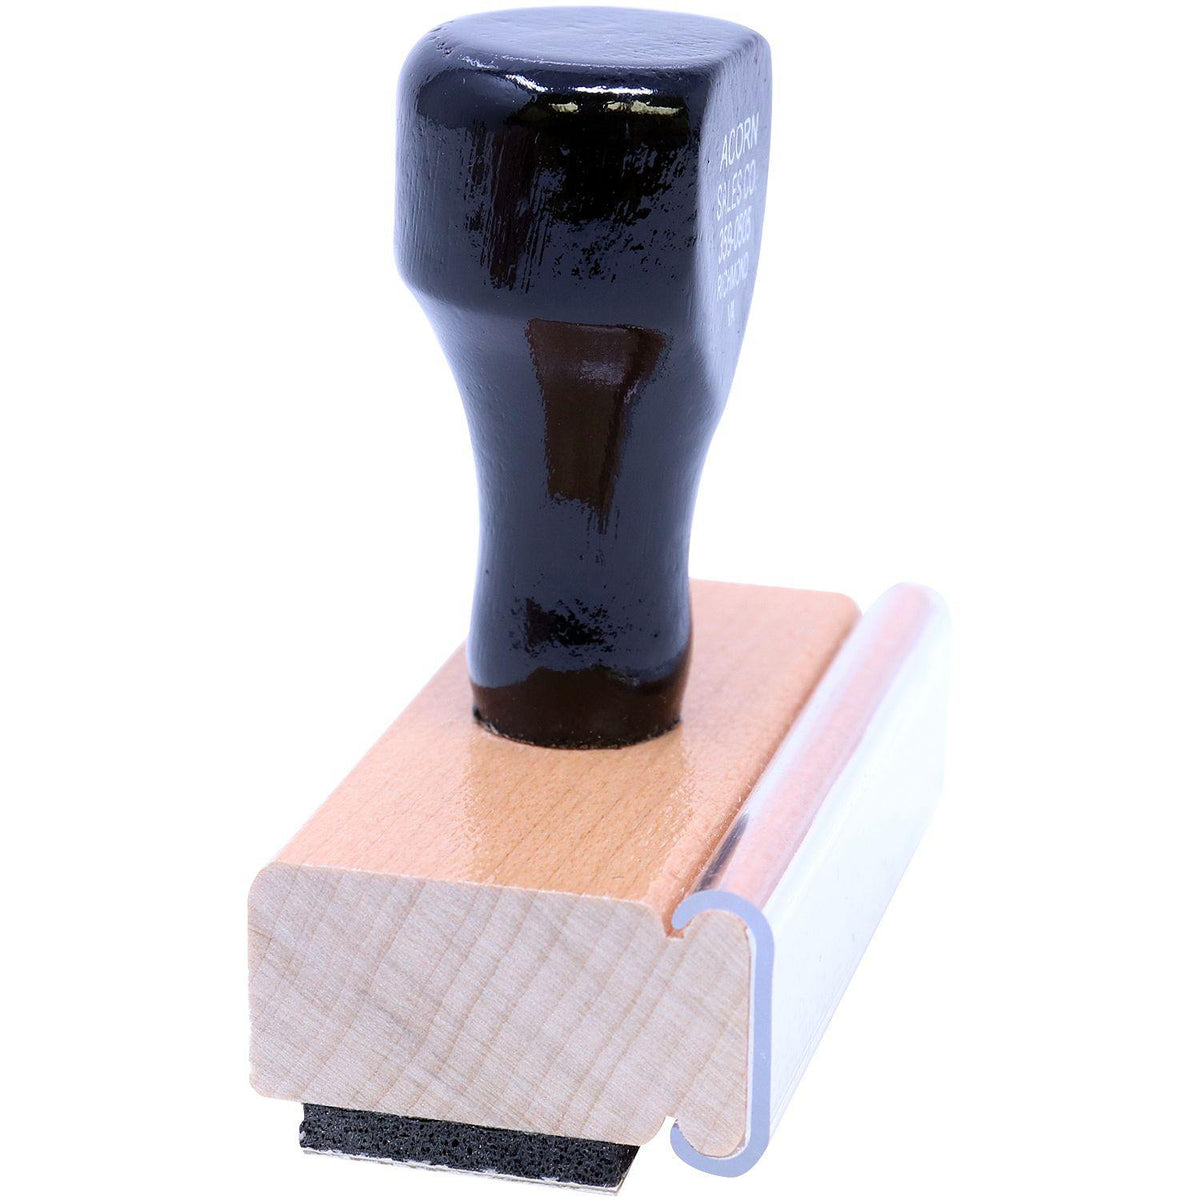 Side View of Large Acreditado Rubber Stamp at an Angle